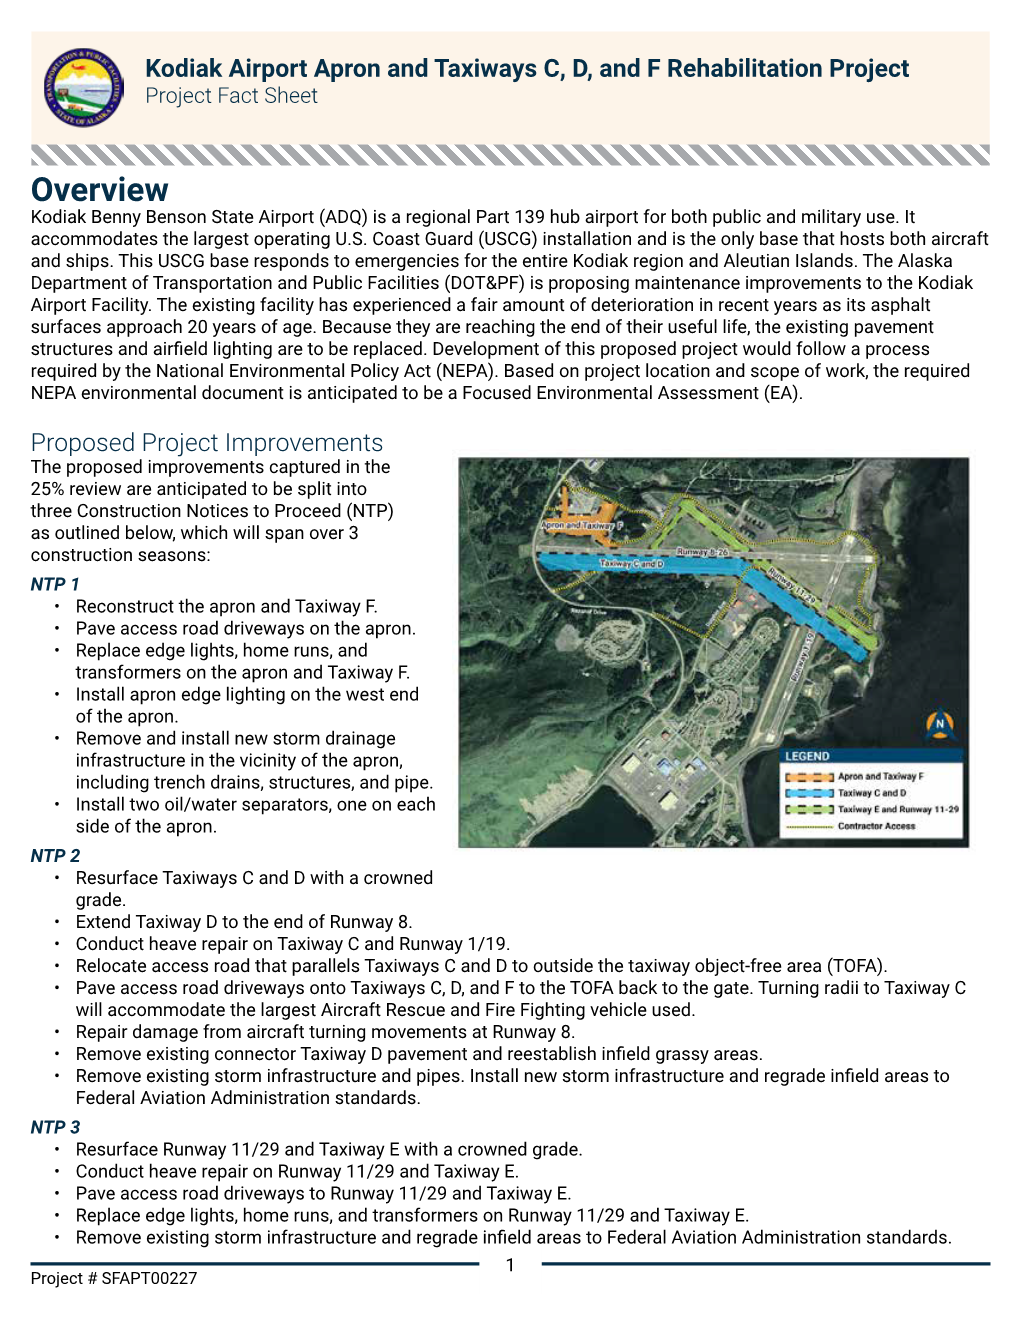 Overview Kodiak Benny Benson State Airport (ADQ) Is a Regional Part 139 Hub Airport for Both Public and Military Use